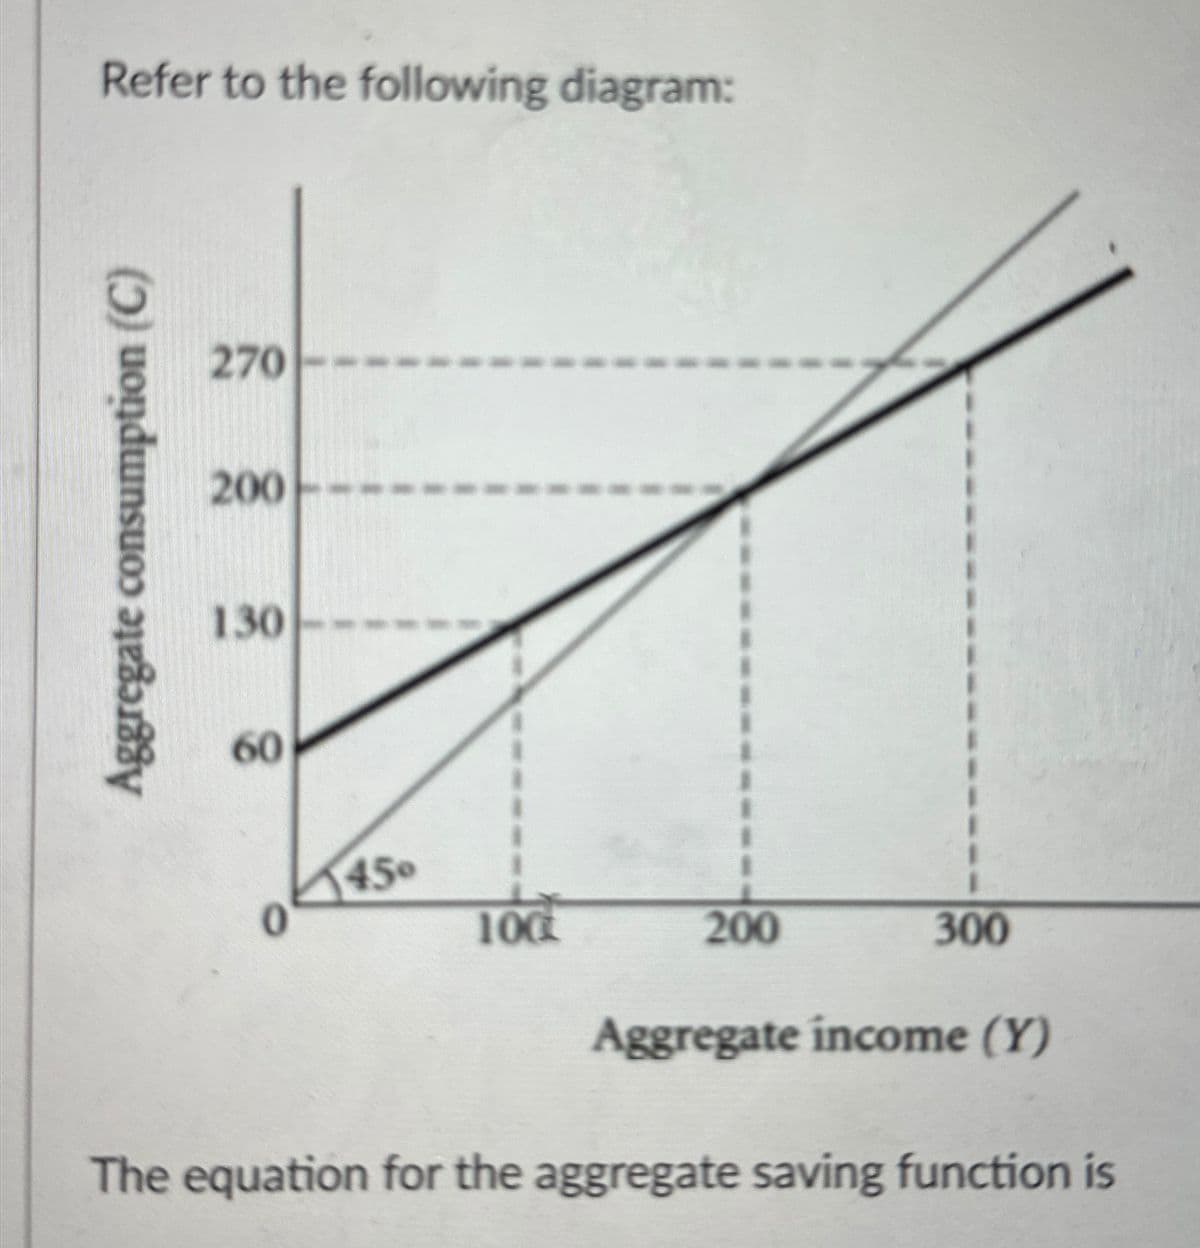 Refer to the following diagram:
Aggregate consumption (C)
270
200
130
60
60
450
100
200
300
Aggregate income (Y)
The equation for the aggregate saving function is